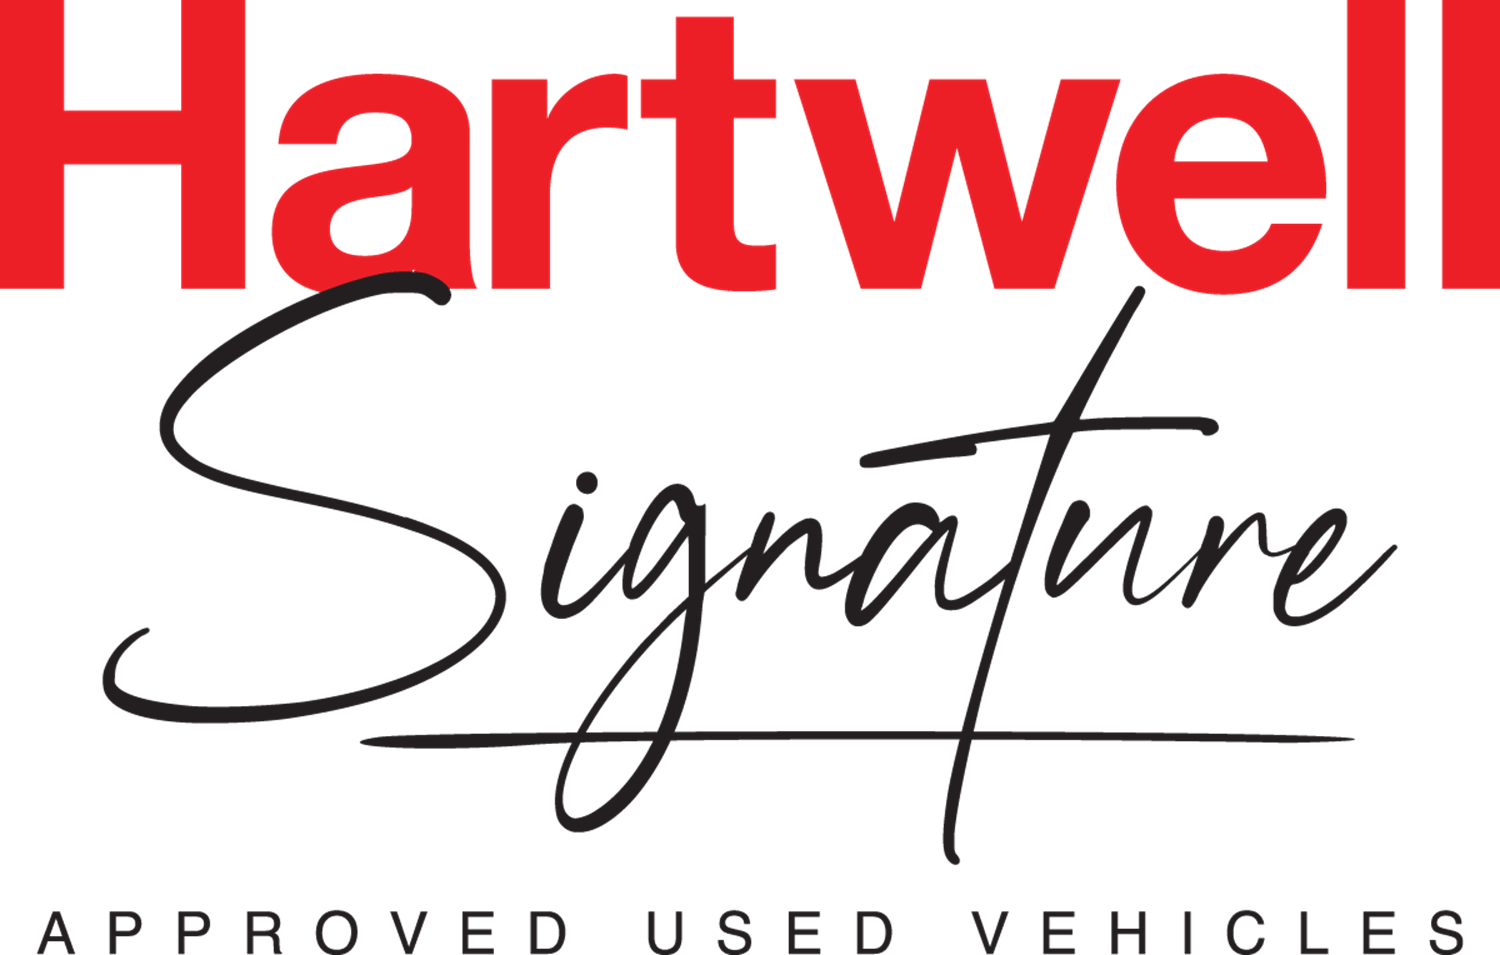 Hartwell Signature Approved Used